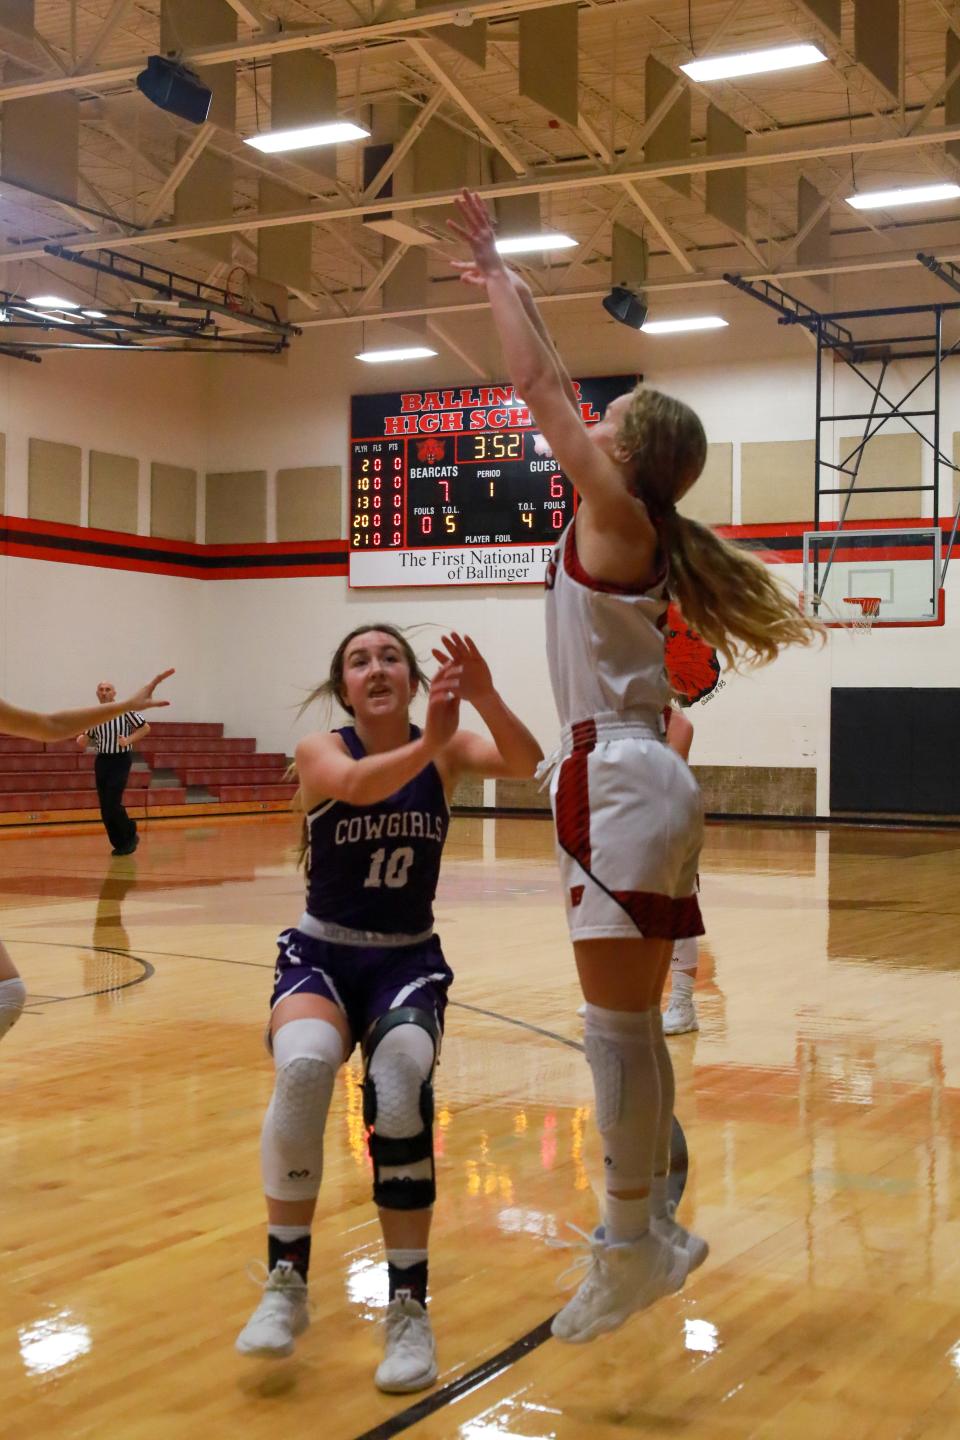 Ballinger's Skyla Hostetter fires a 3-pointer as Mason's Sterling Smith closes in during their basketball game Tuesday, Dec. 7, 2021.